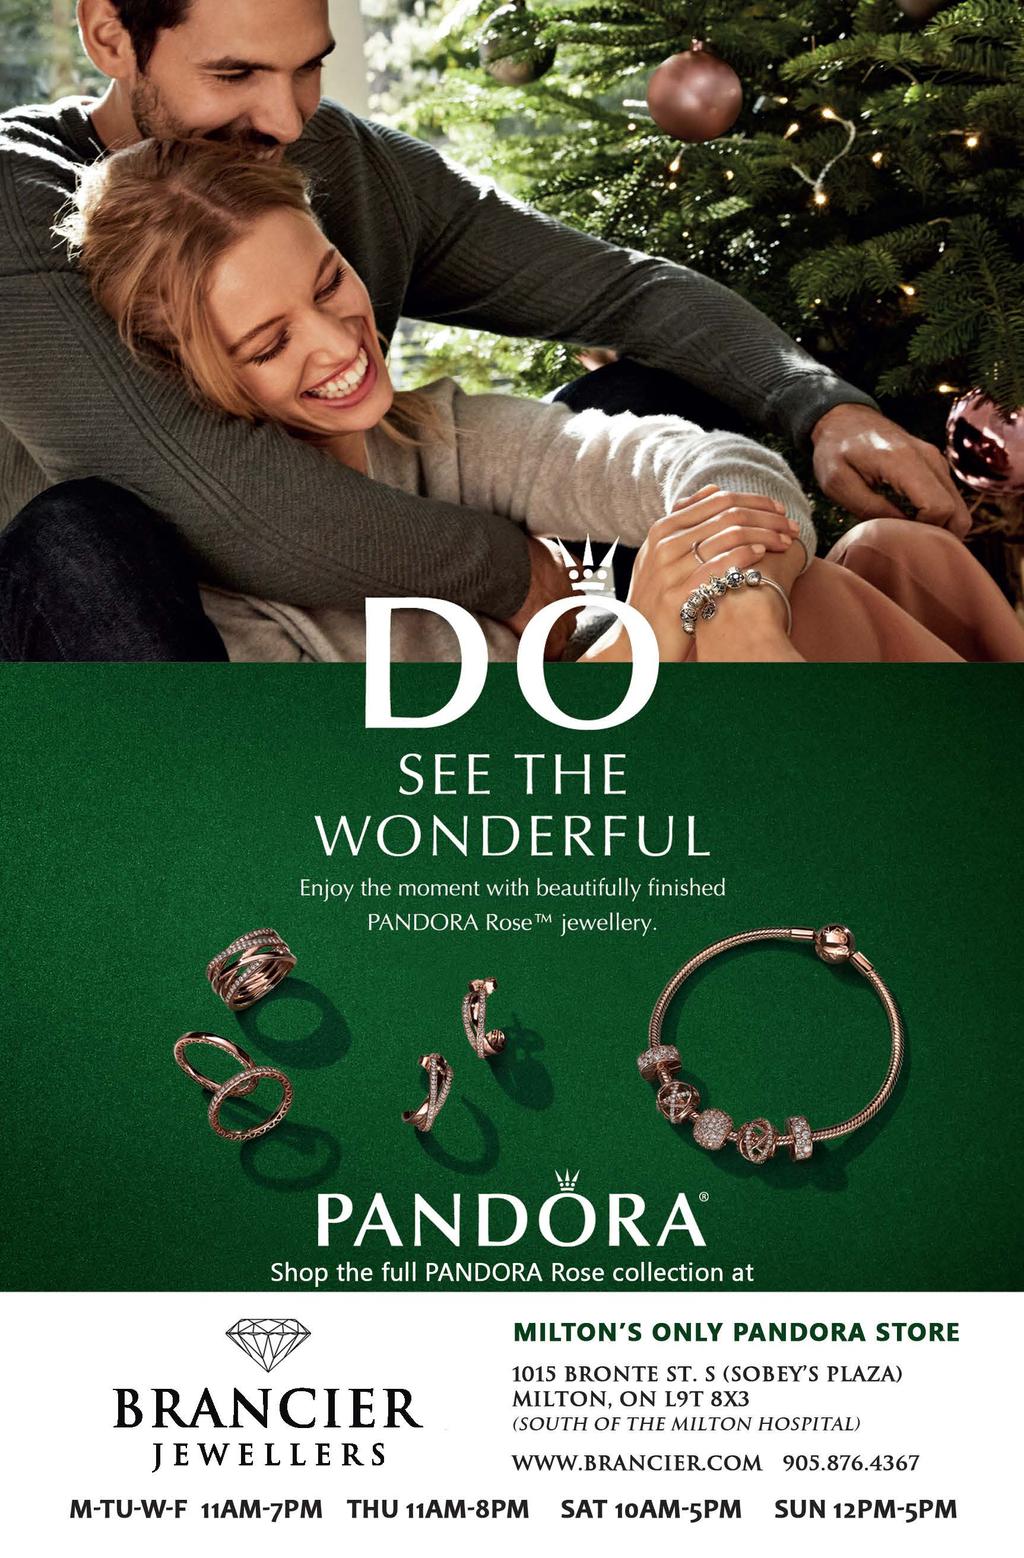 ;... ' D SEE THE WONDERFUL Enjoy the moment with beautifully finished PANDORA Rose jewellery. PANDORA Shop the full PANDORA Rose collection at JEWELLERS WWW.BRANCIER.COM 905.876.